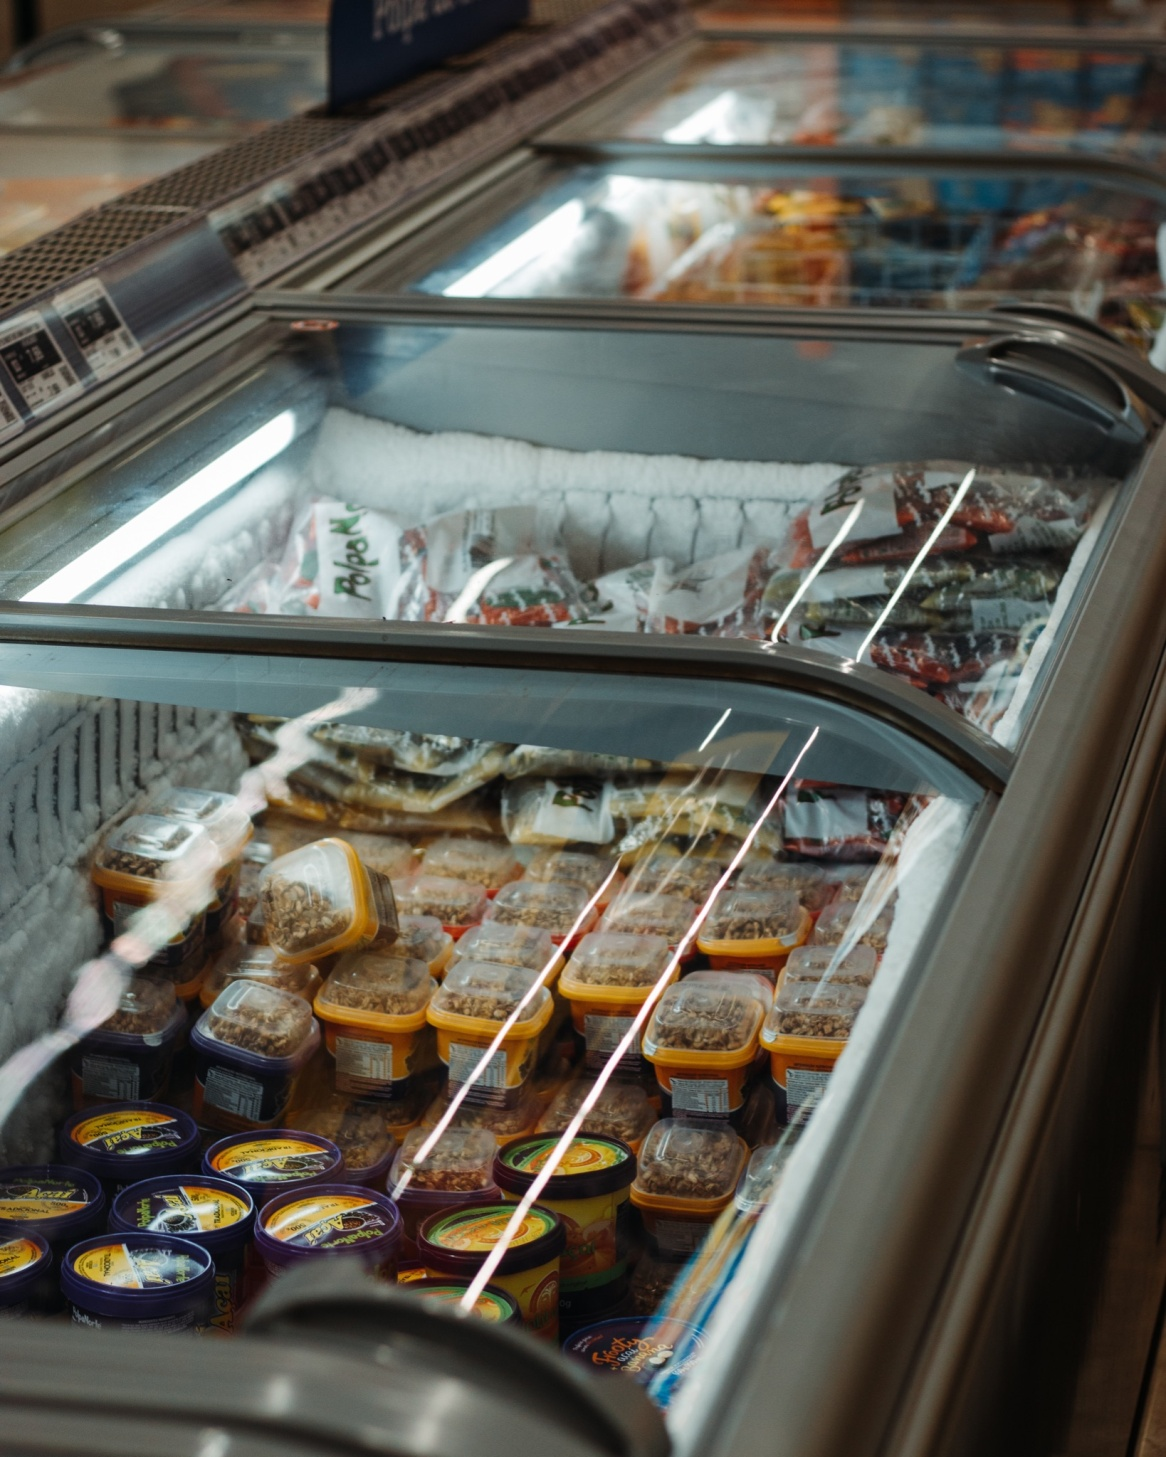 A commercial refrigerator in a supermarket